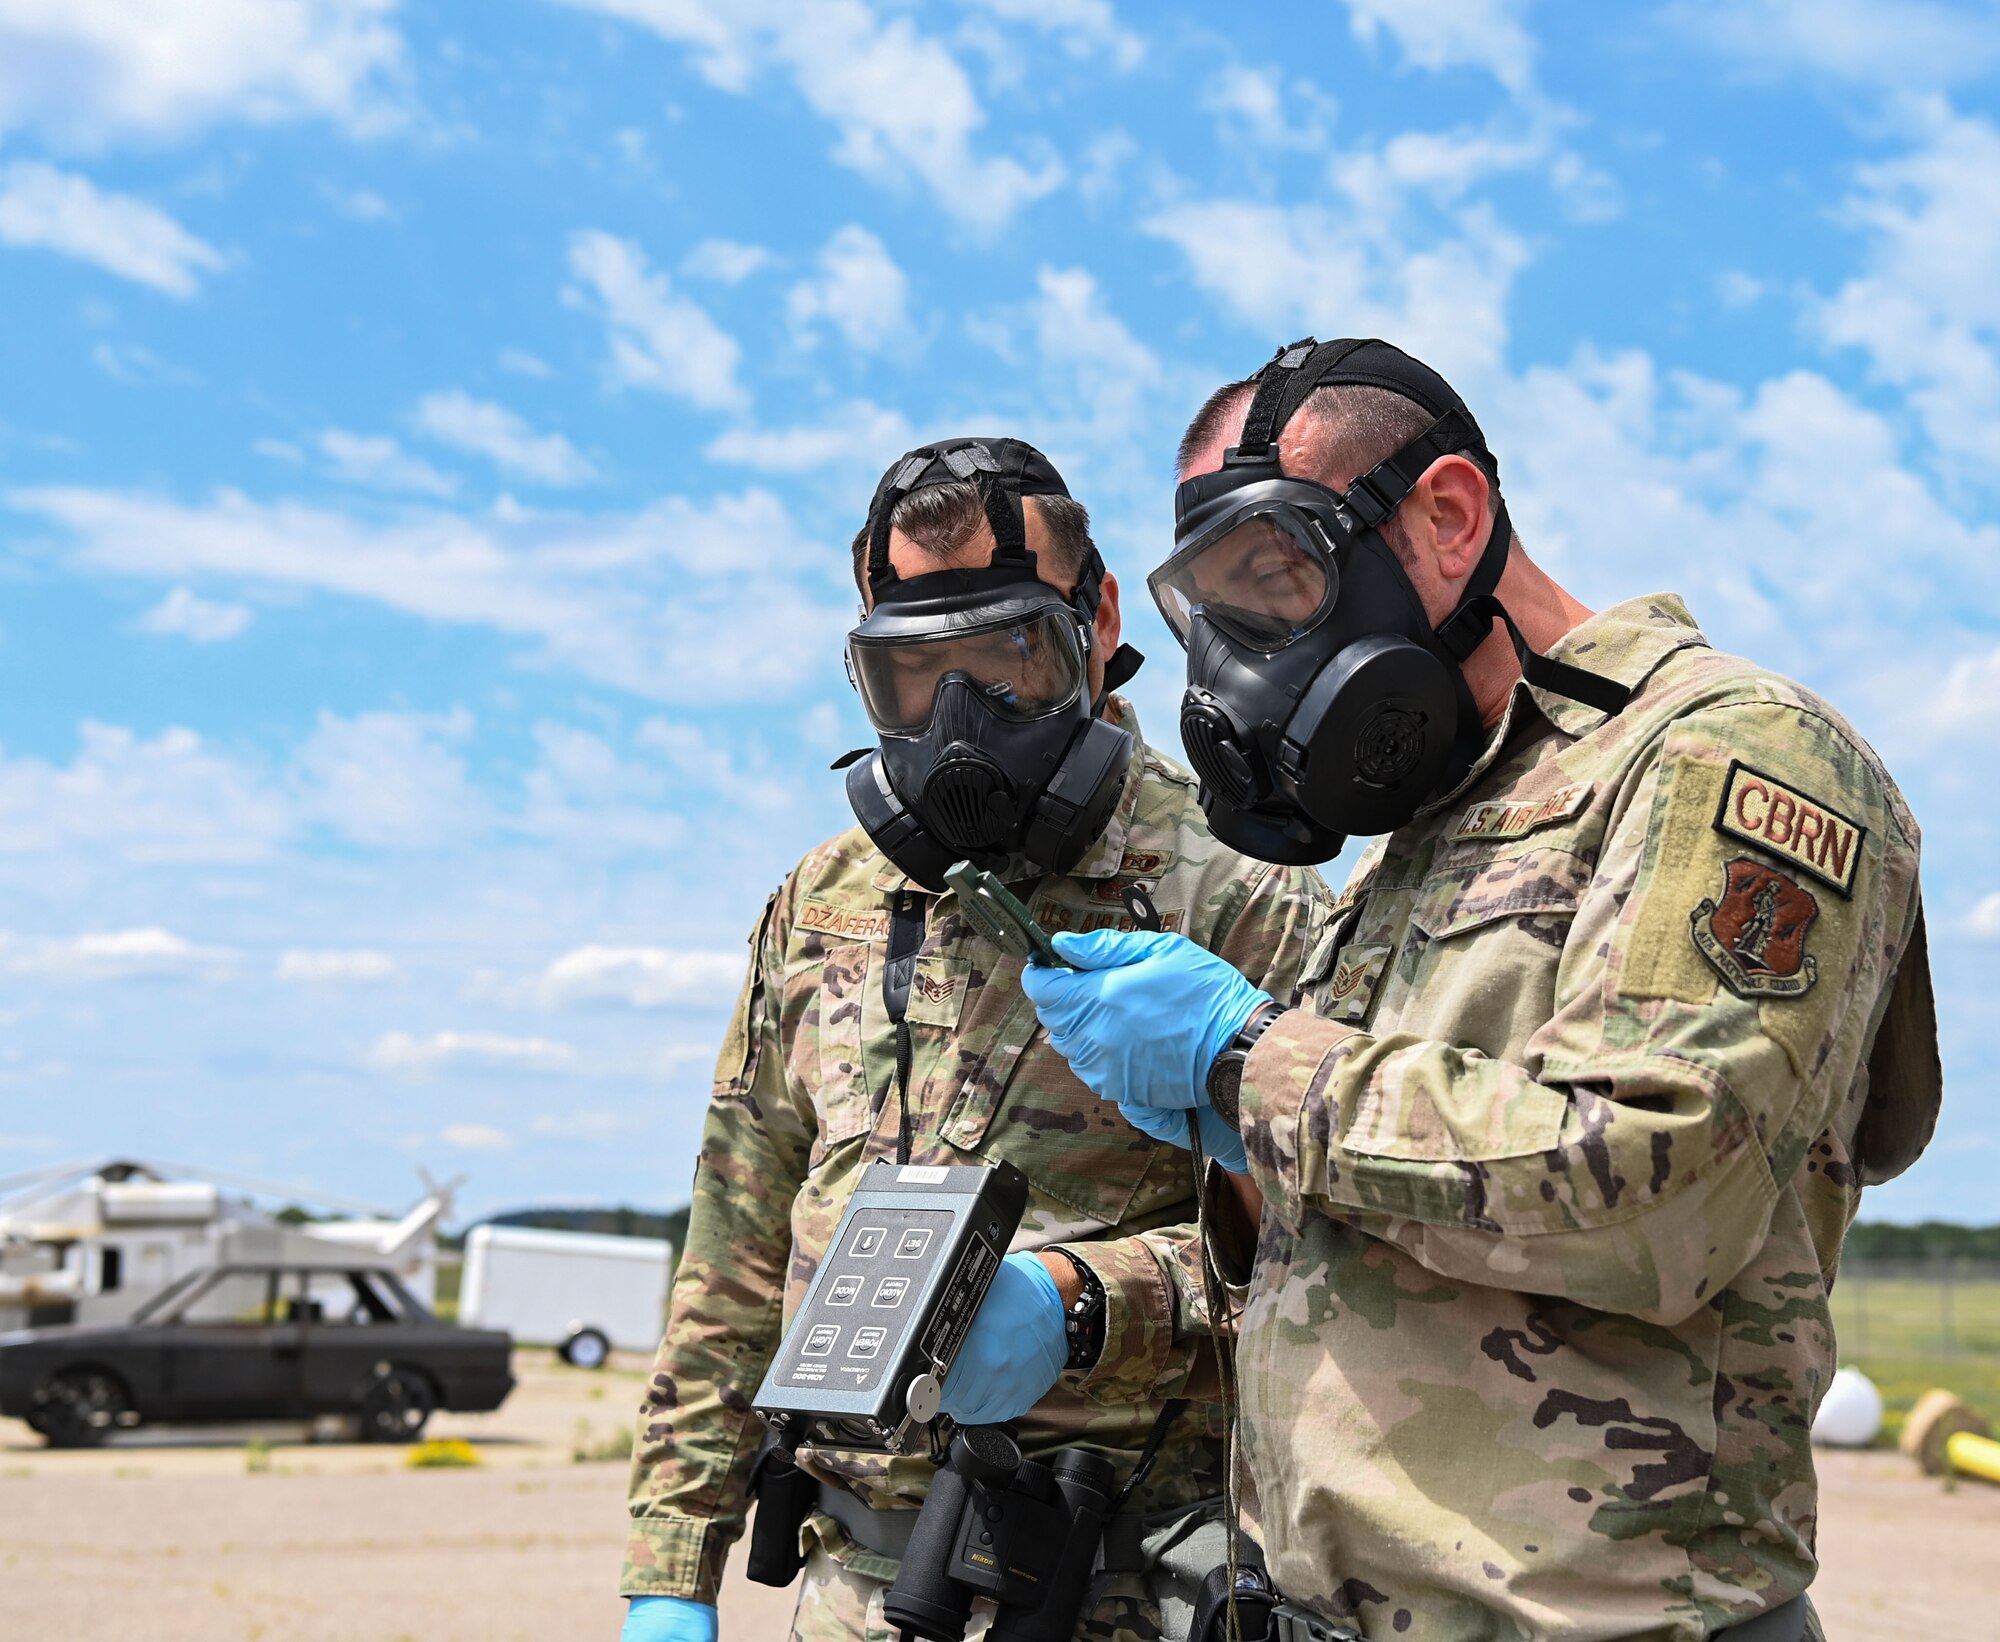 Two airmen in camo wearing gas masks examine a compass